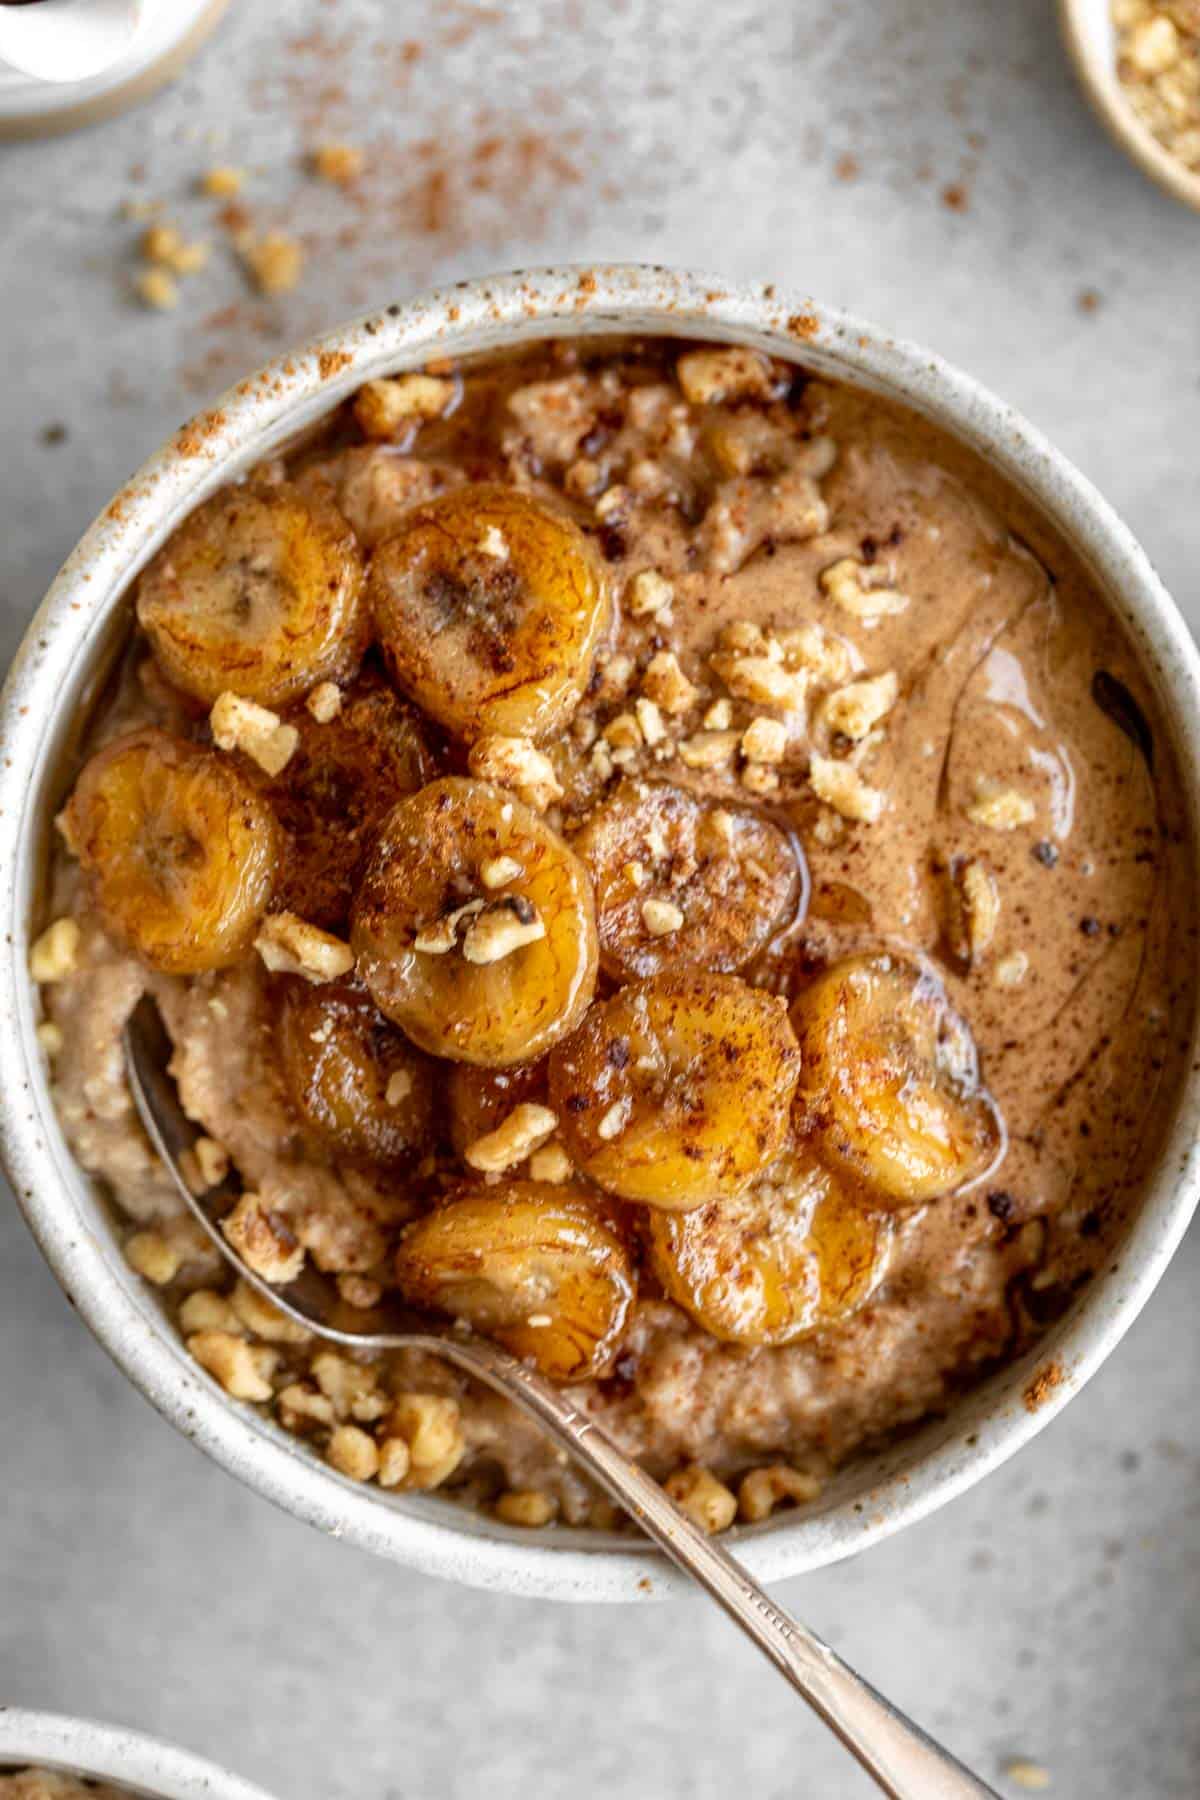 spoon in a bowl of oatmeal with banana